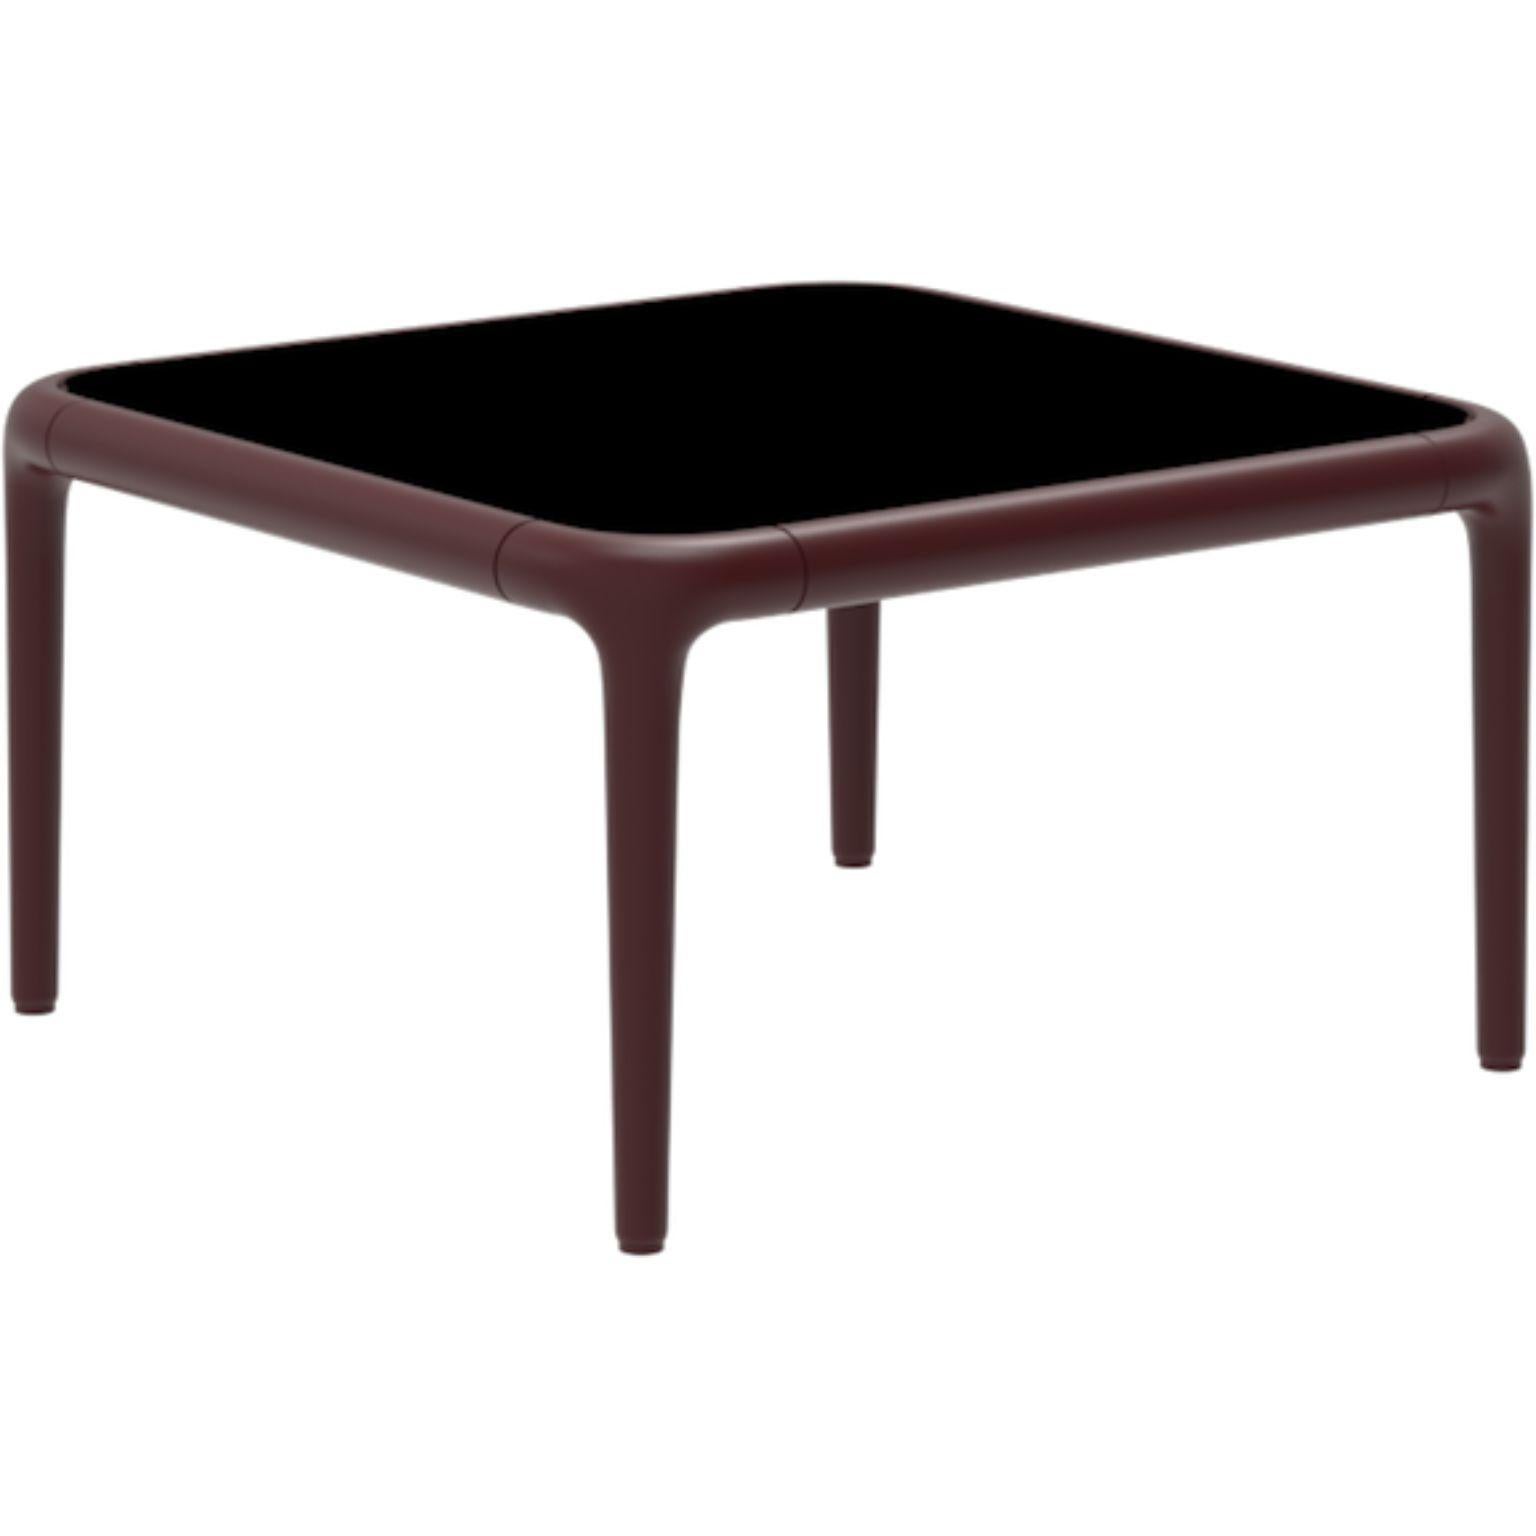 Xaloc Burgundy coffee table 50 with glass top by Mowee
Dimensions: D 50 x W 50 x H 28 cm
Materials: Aluminum, tinted tempered glass top.
Also available in different aluminum colors and finishes (HPL Black Edge or Neolith).

Xaloc synthesizes